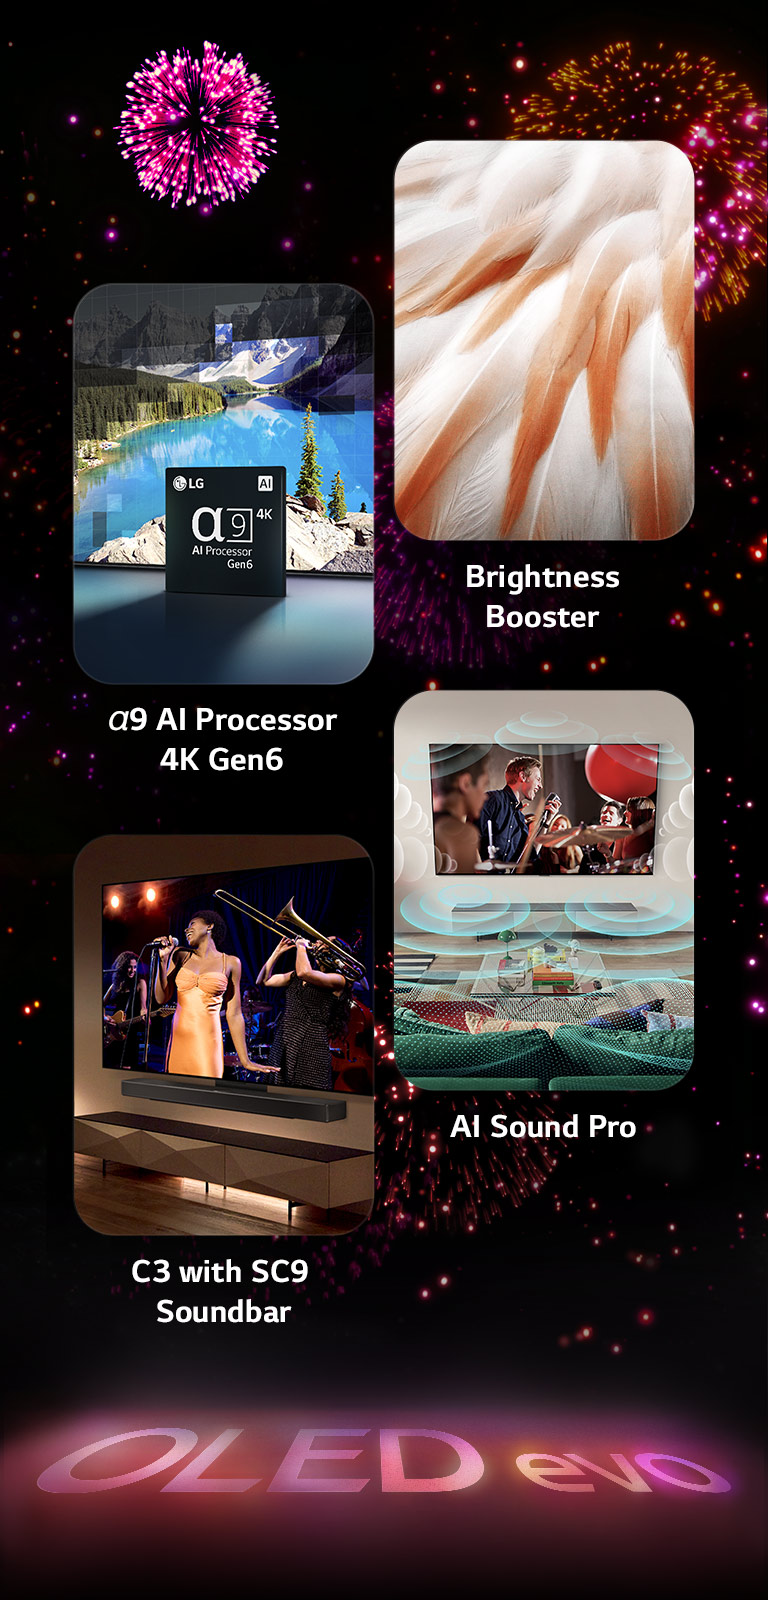 An image presenting the key features of the LG OLED evo C3 against a black background with a pink and purple firework display. The pink reflection from the firework display on the ground shows the words "OLED evo." Within the picture, an image depicting the α9 AI Processor 4K Gen6 shows the chip standing before a picture of a lake scene being remastered with the processing technology. An image presenting Brightness Booster Max shows a bird's bright feathers. An image presenting the SC9 Soundbar shows the LG OLED evo C3 and SC9 Soundbar neatly on the wall with a music concert playing on the TV. An image presenting AI Sound Pro shows a rock show playing on the TV with music bubbles depicting soundwaves filling the living space.